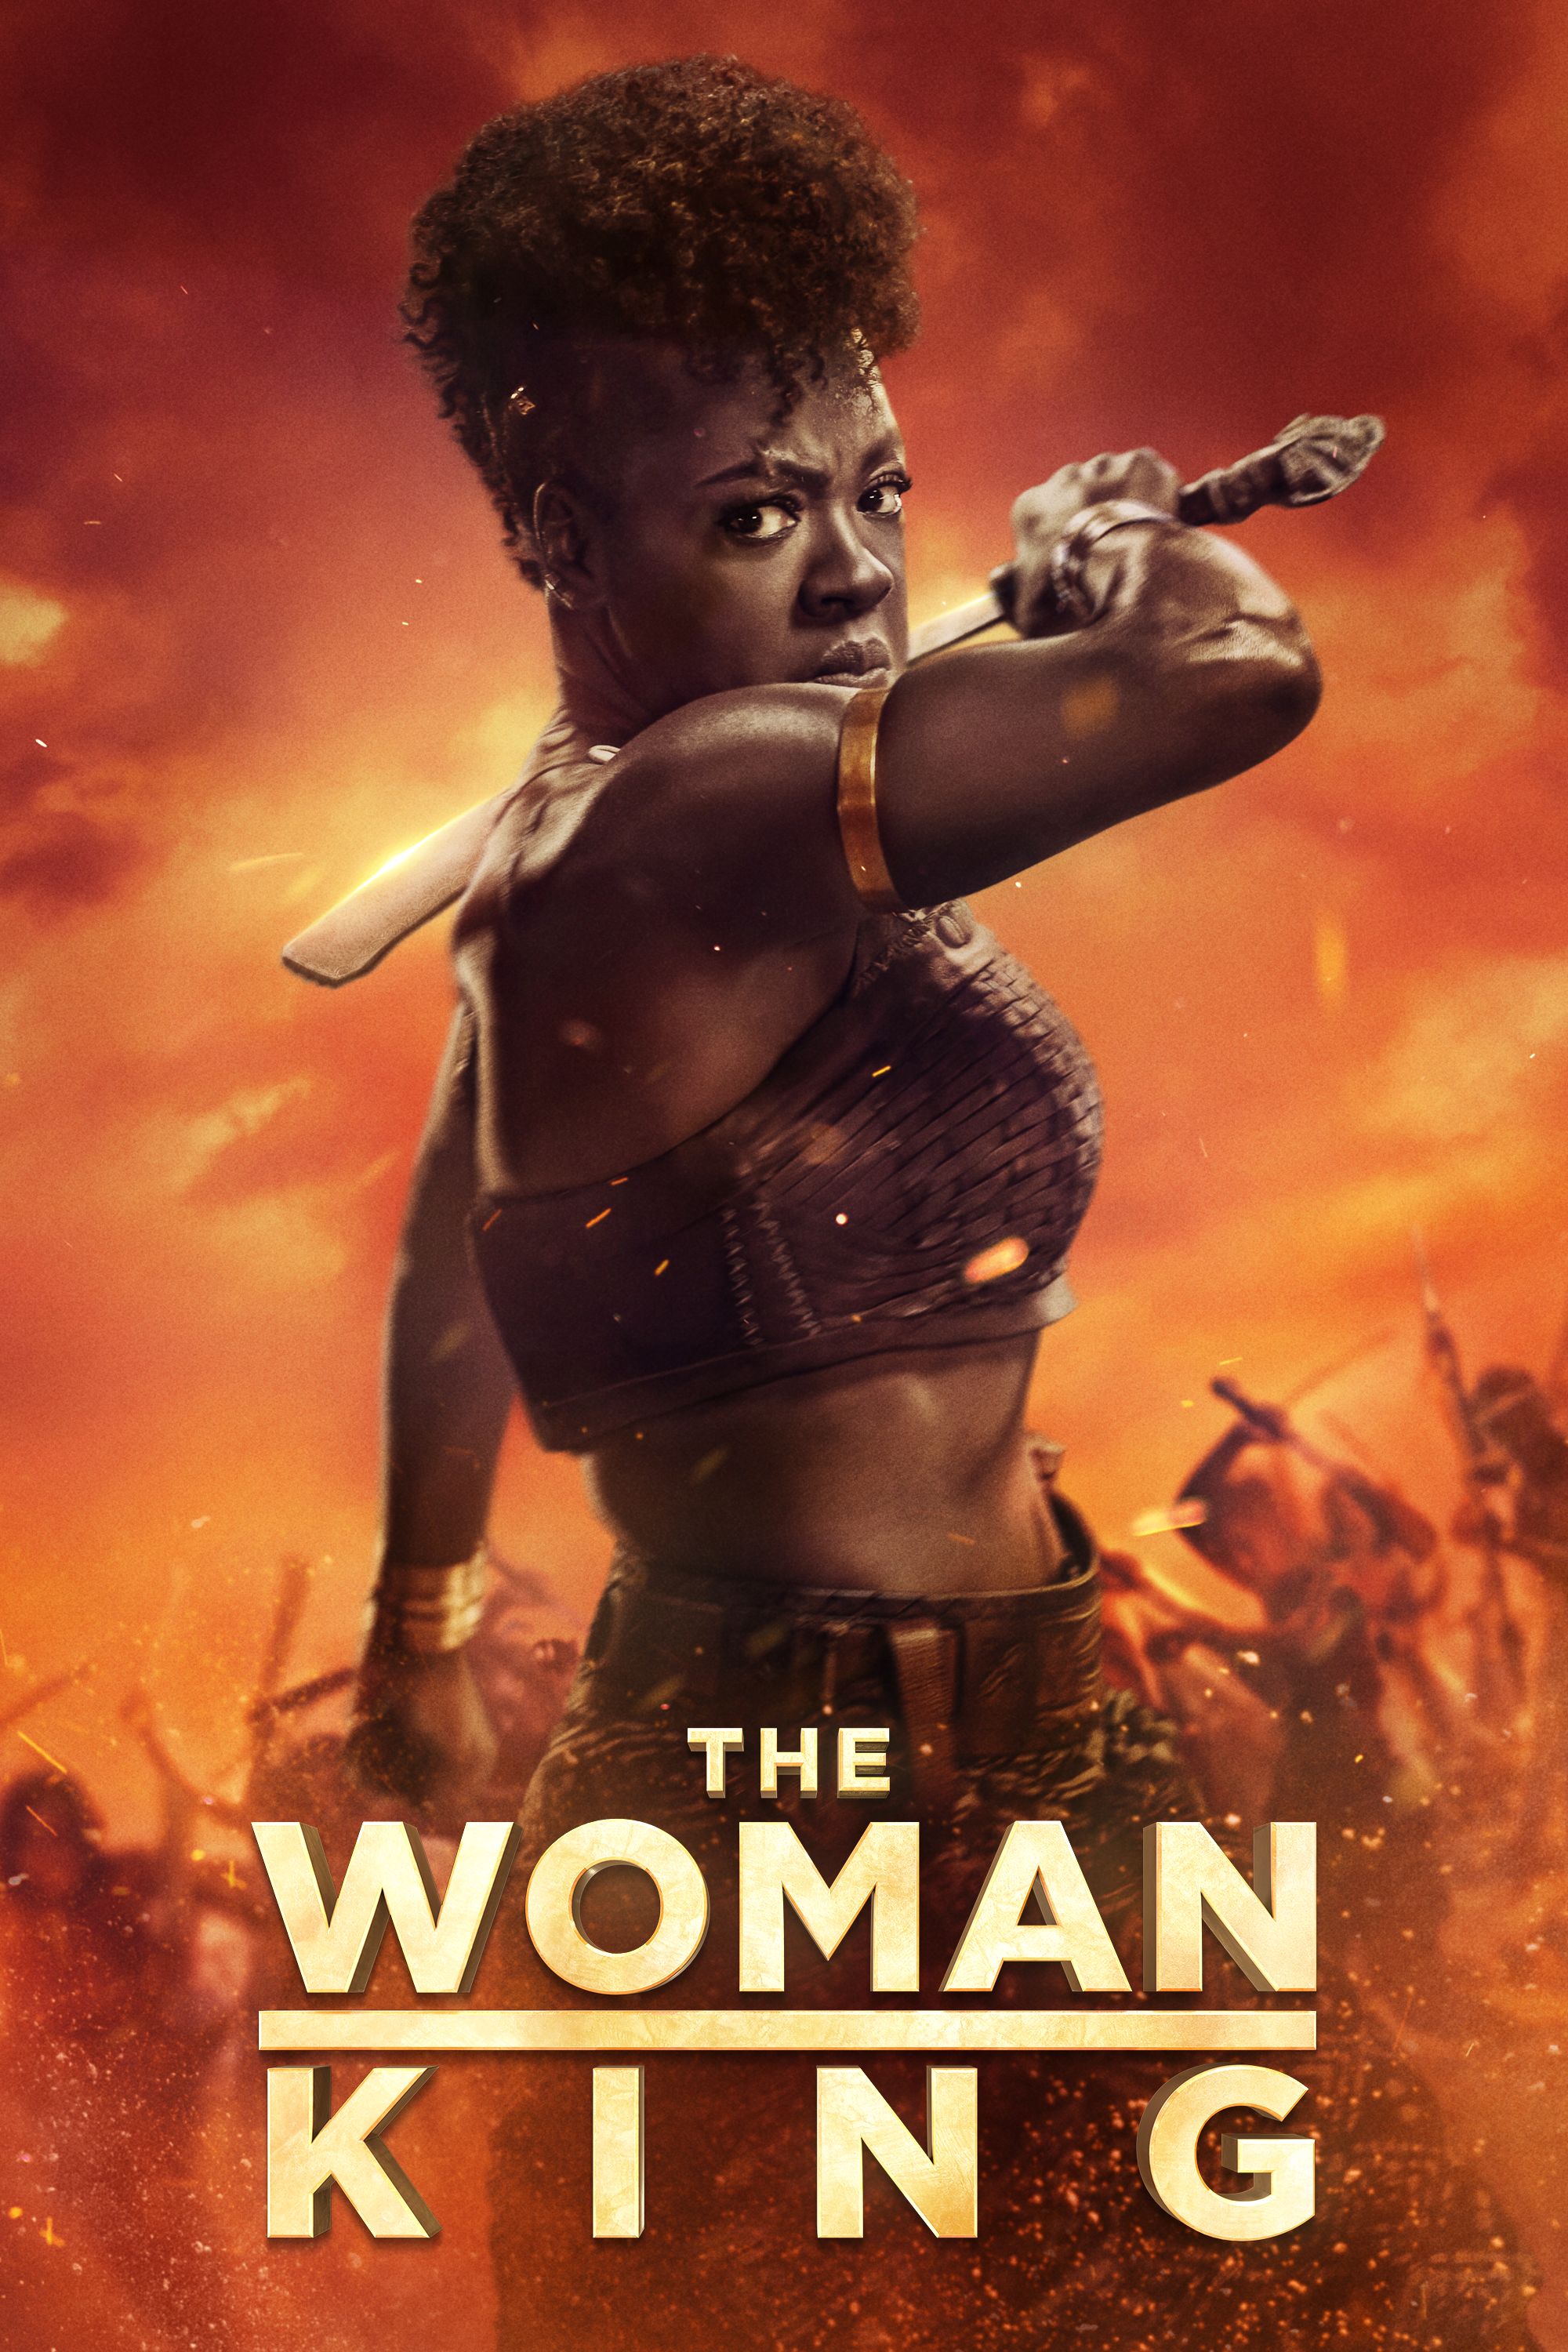 the woman king movie review